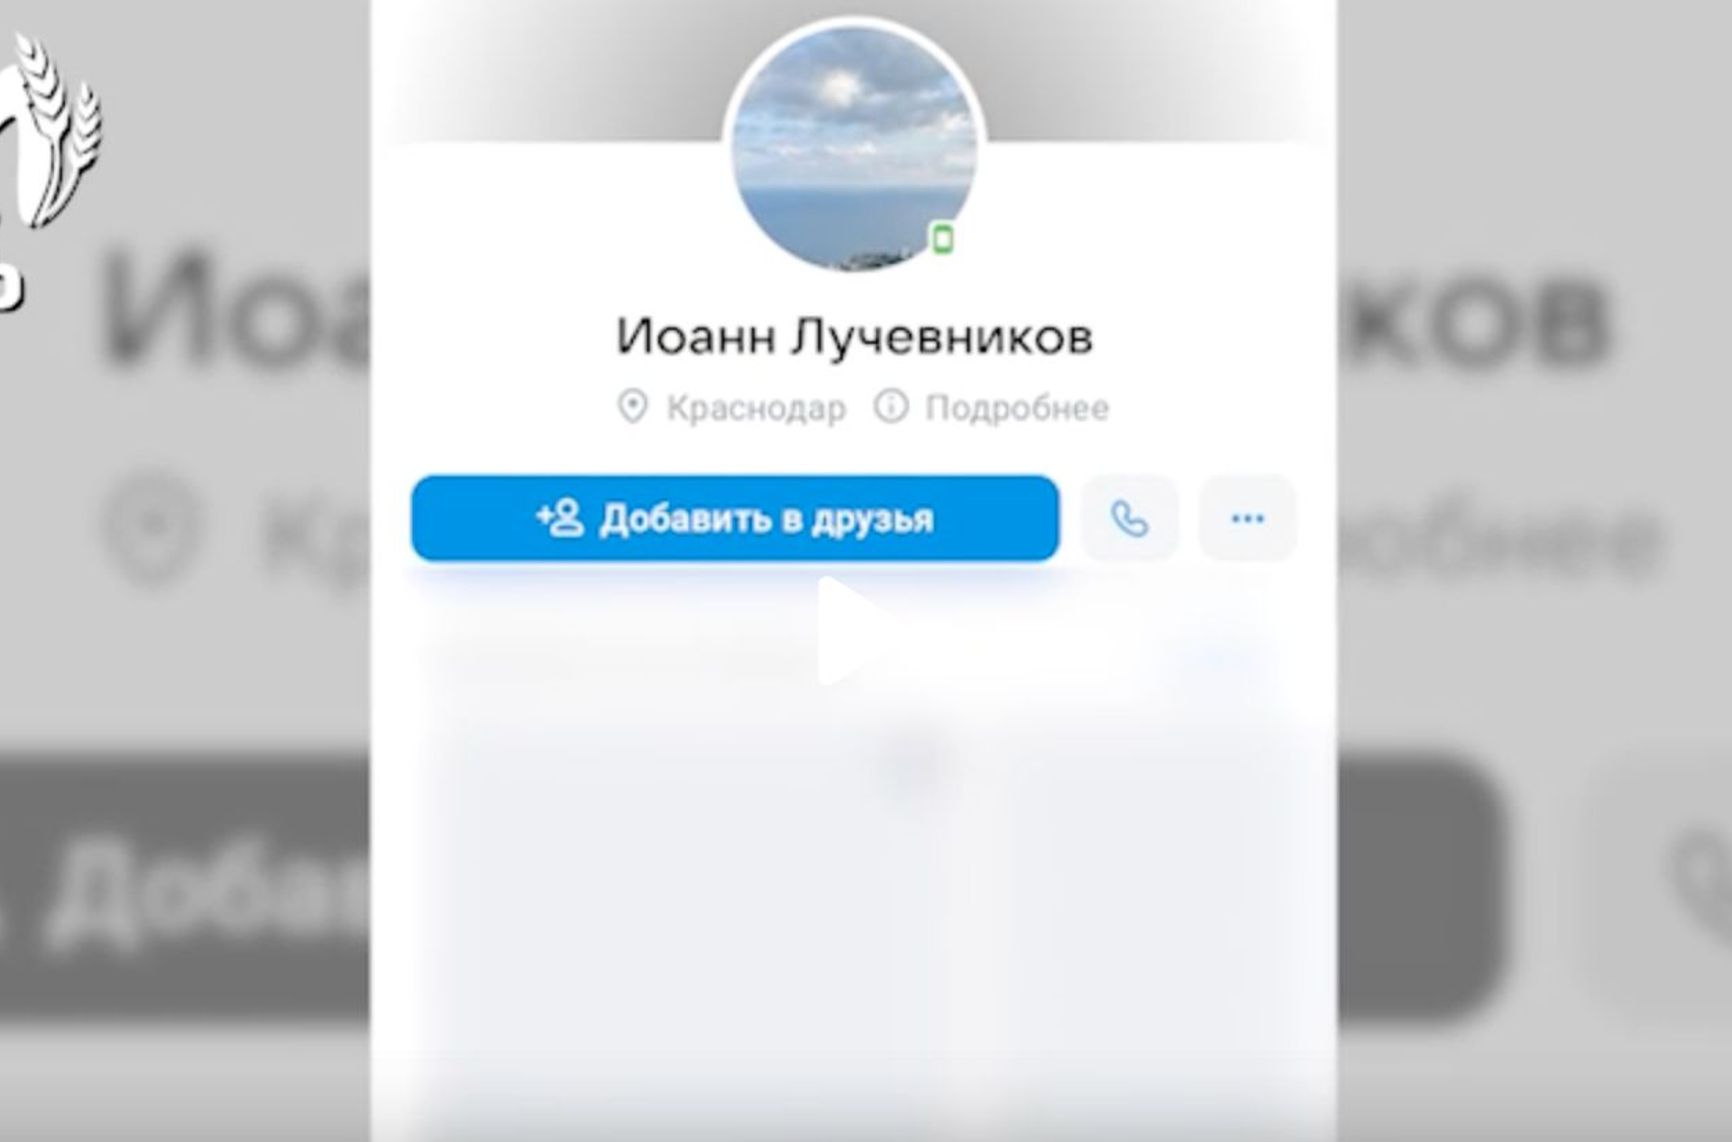 Khoroshilov's page before being deleted